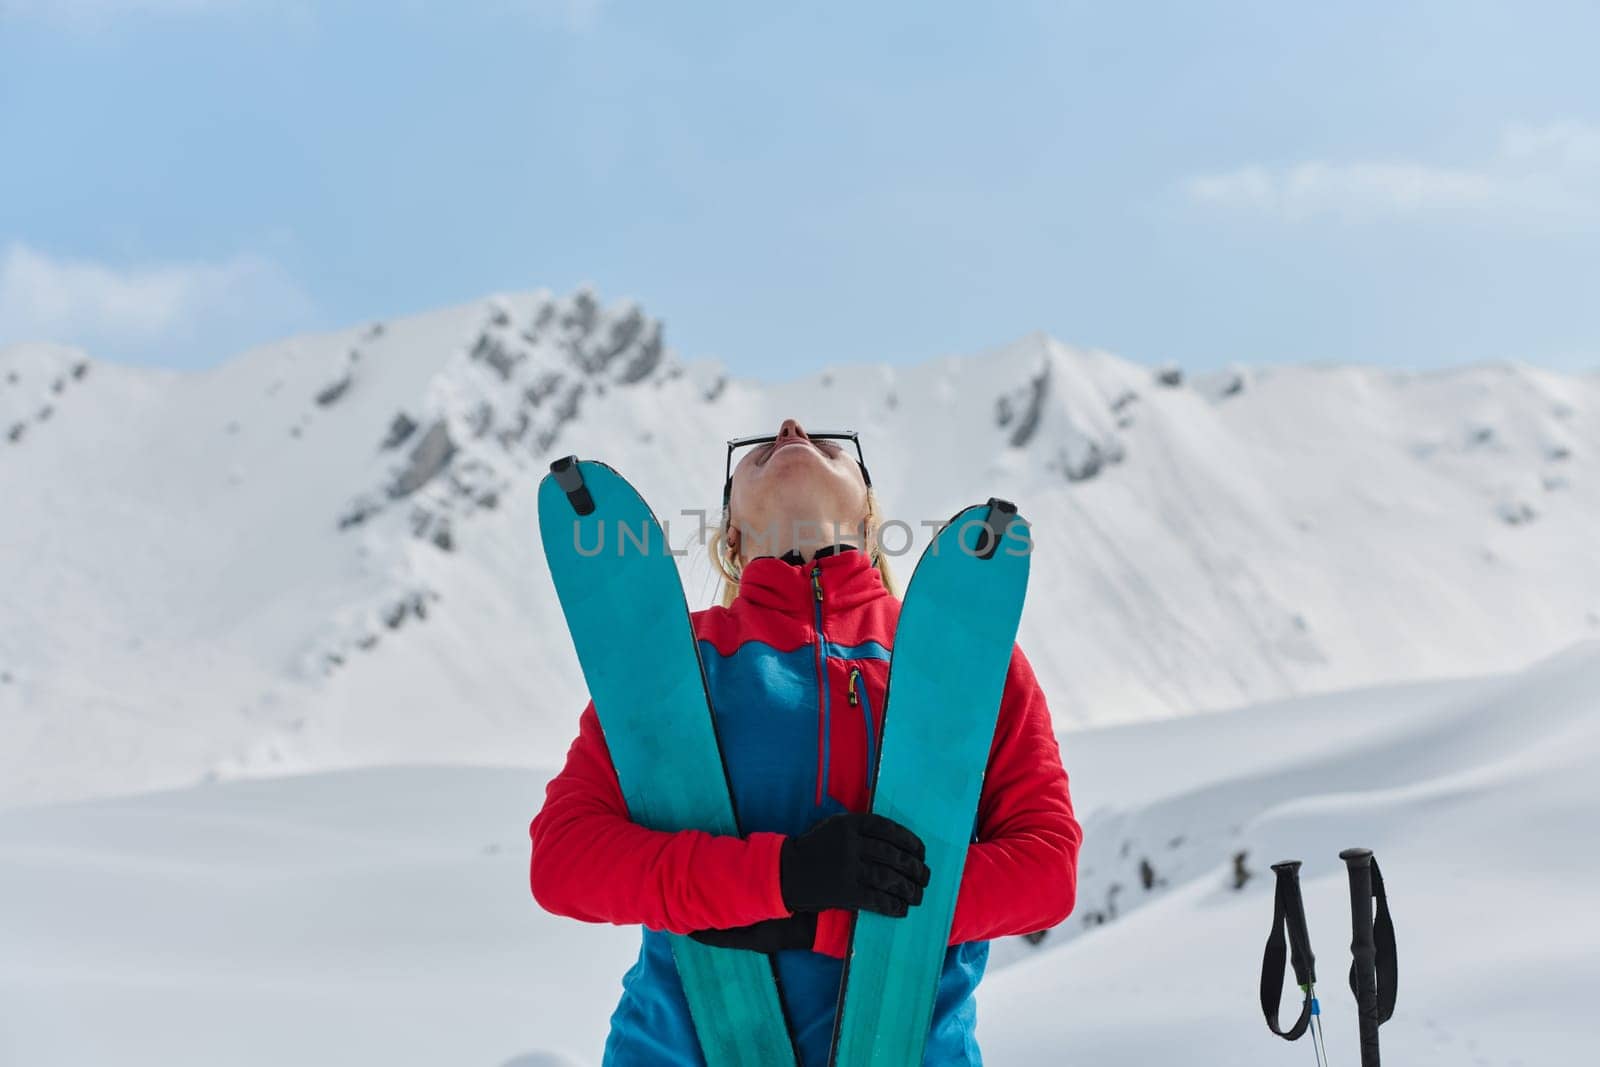 A professional woman skier rejoices after successfully climbing the snowy peaks of the Alps.